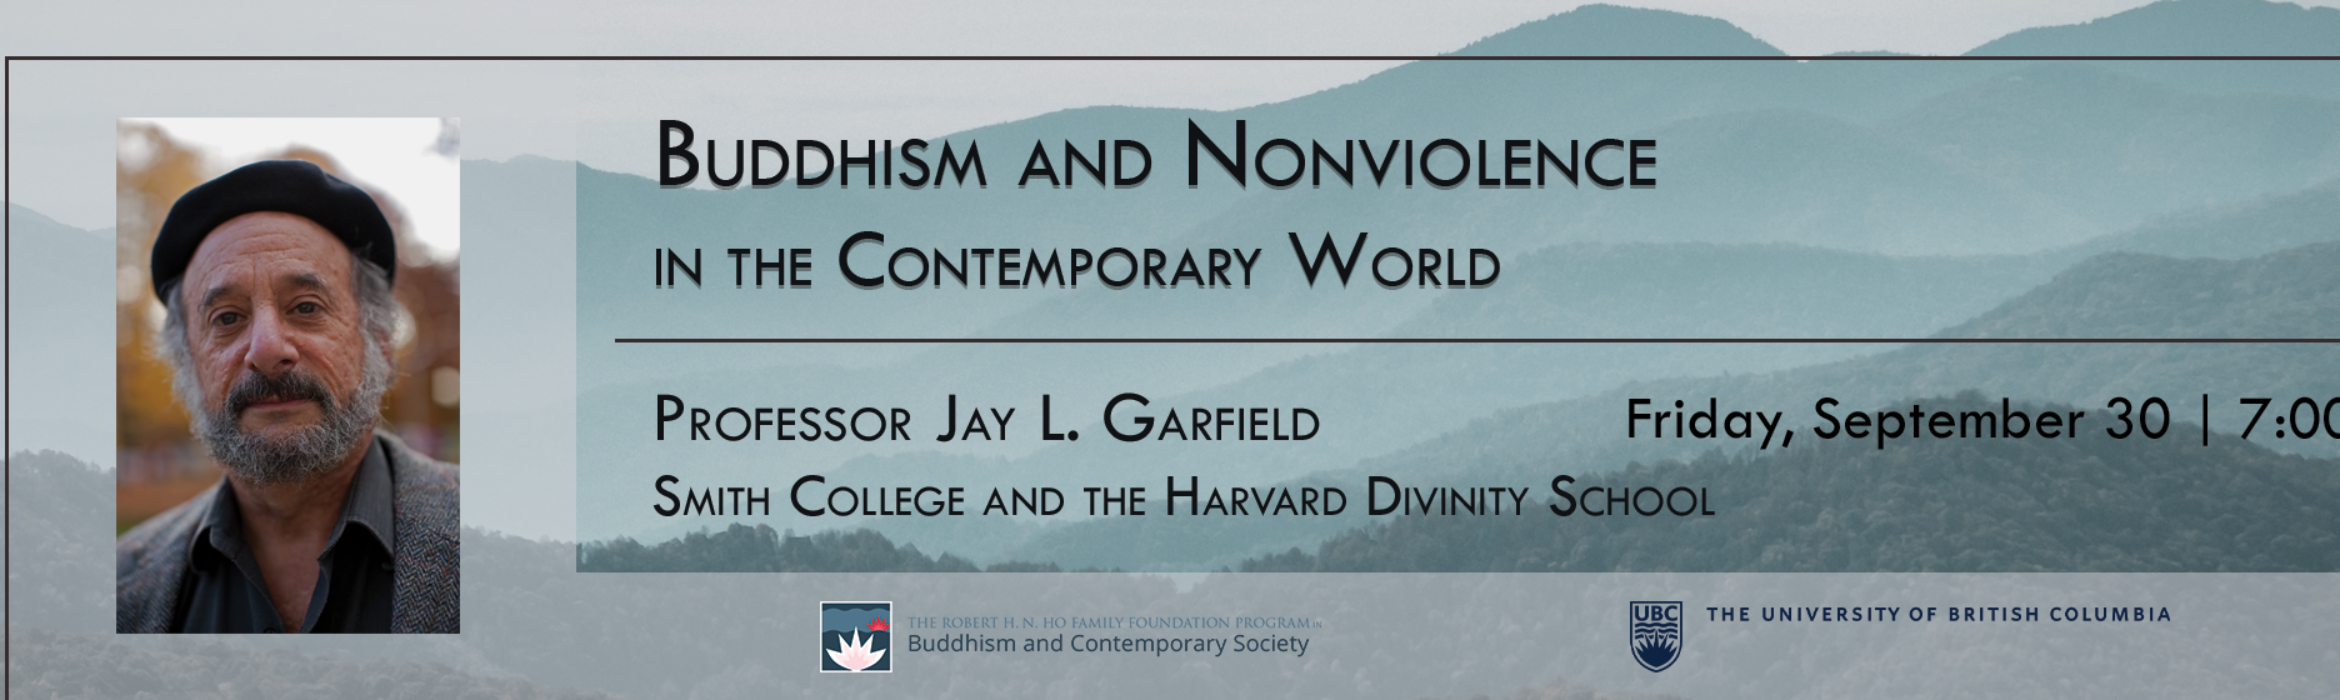 Keynote Lecture: Buddhism and Nonviolence in the Contemporary World